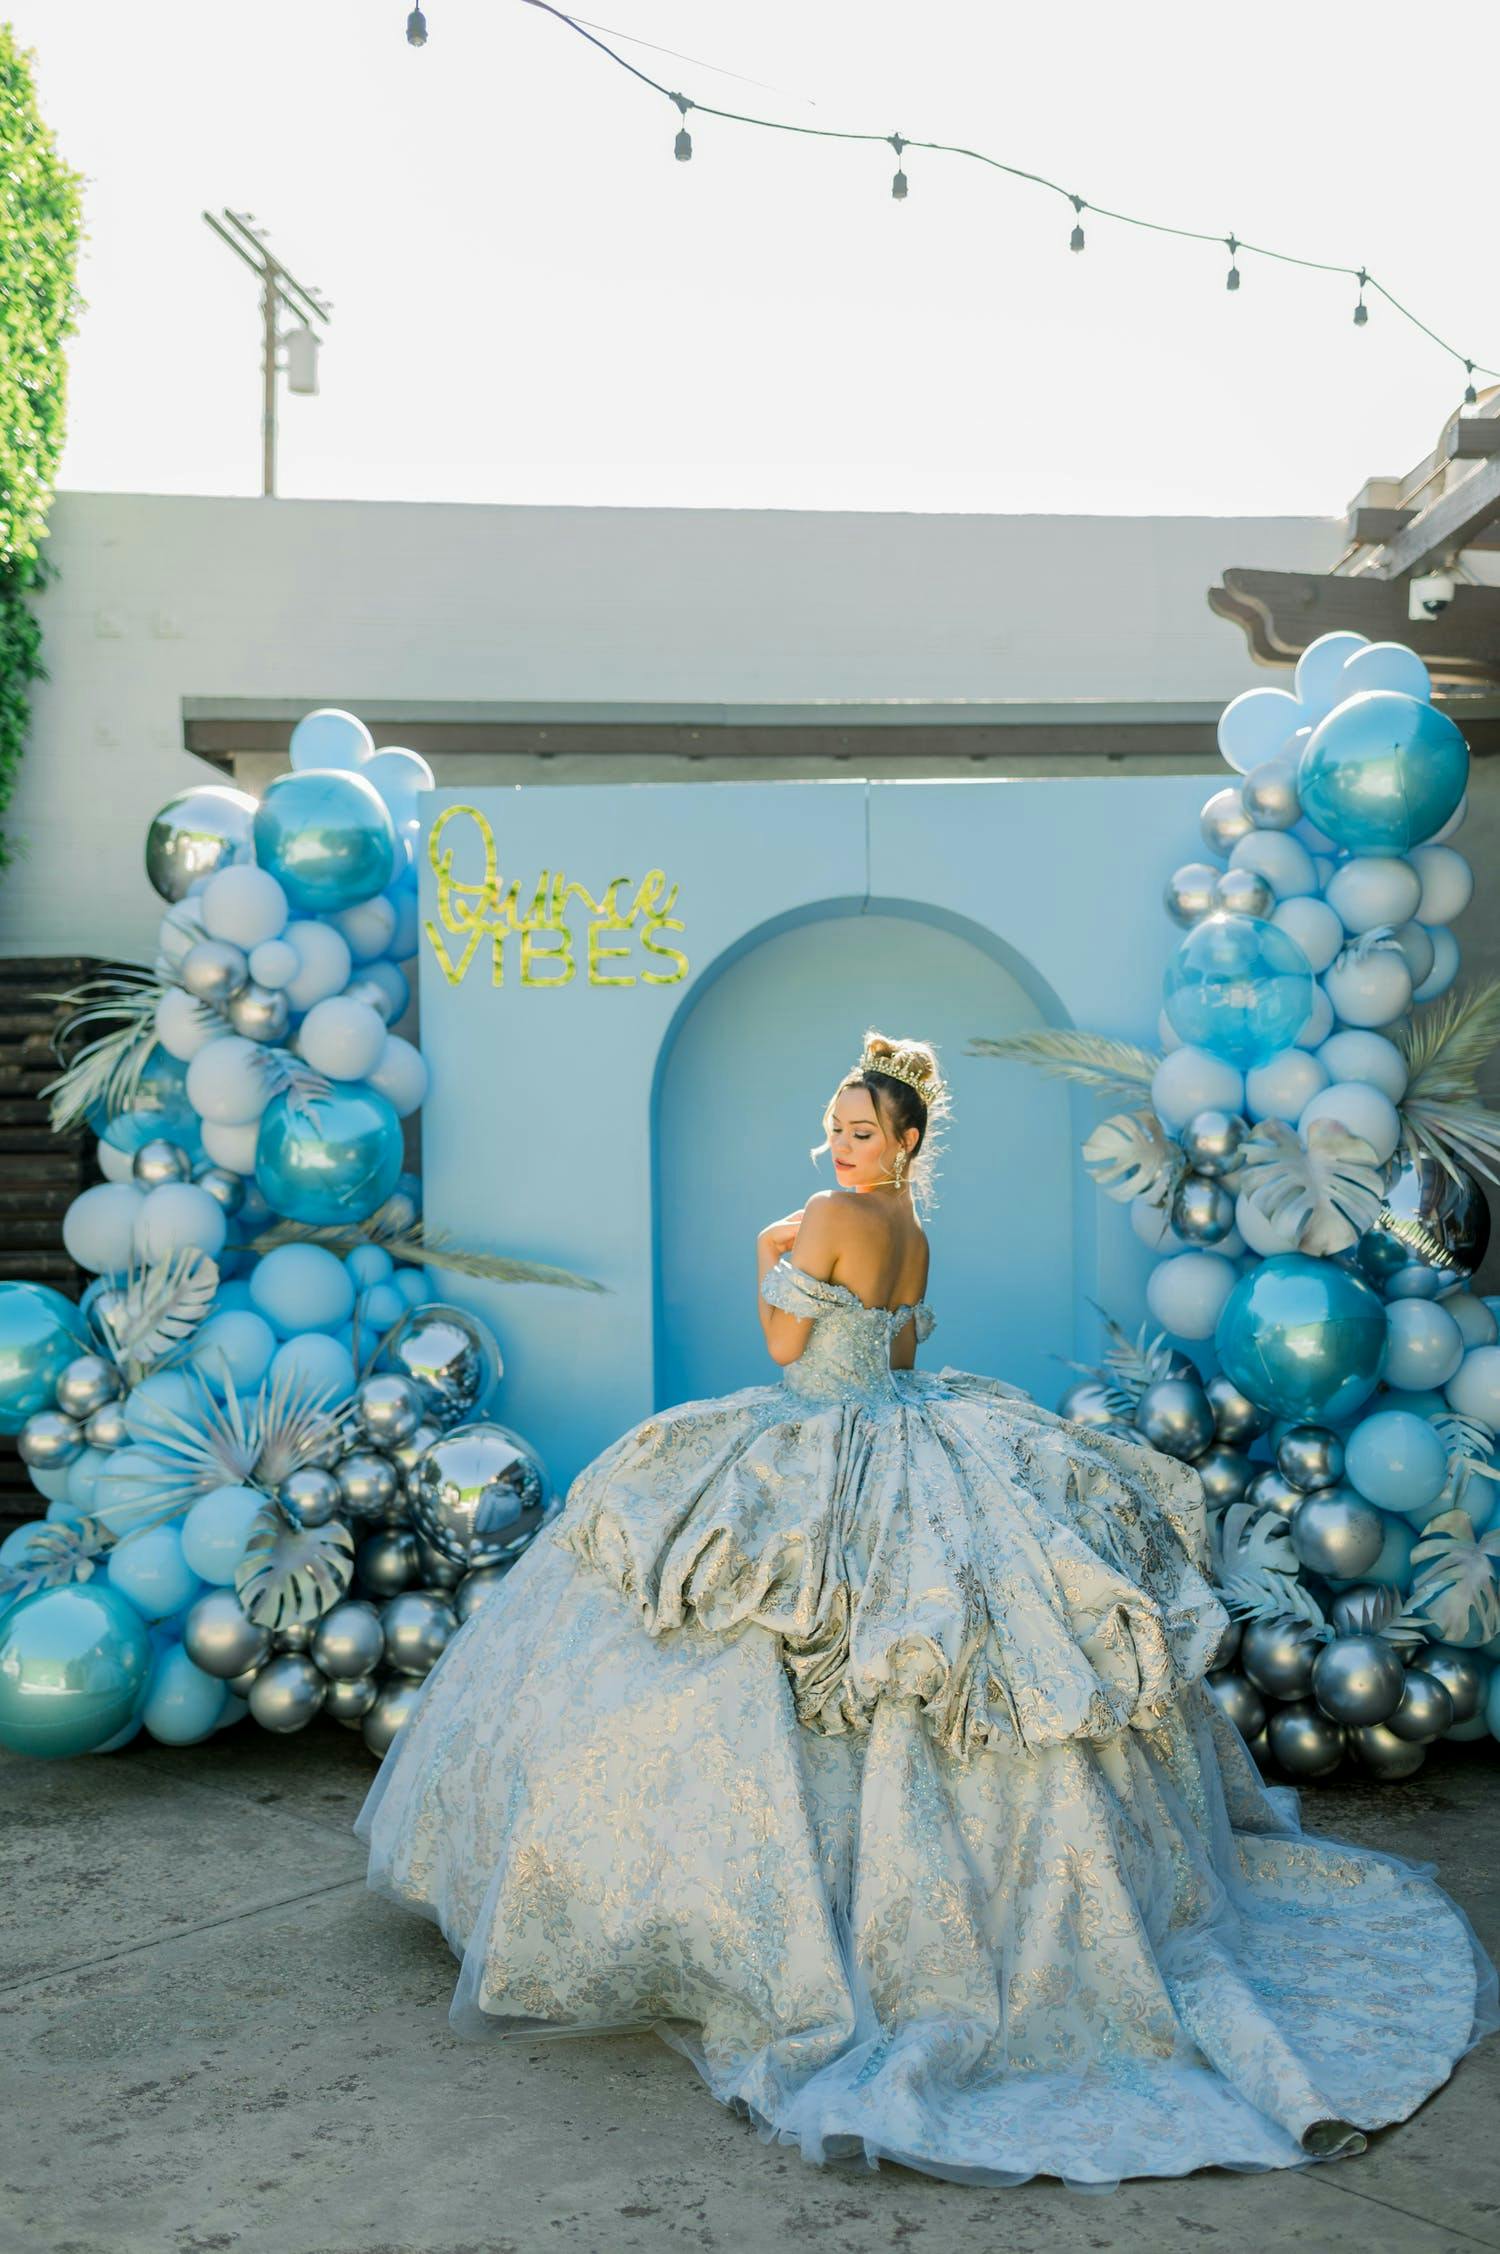 Quinceañera in blue cinderella dress stands in front of blue backdrop framed by blue and silver balloons | PartySlate